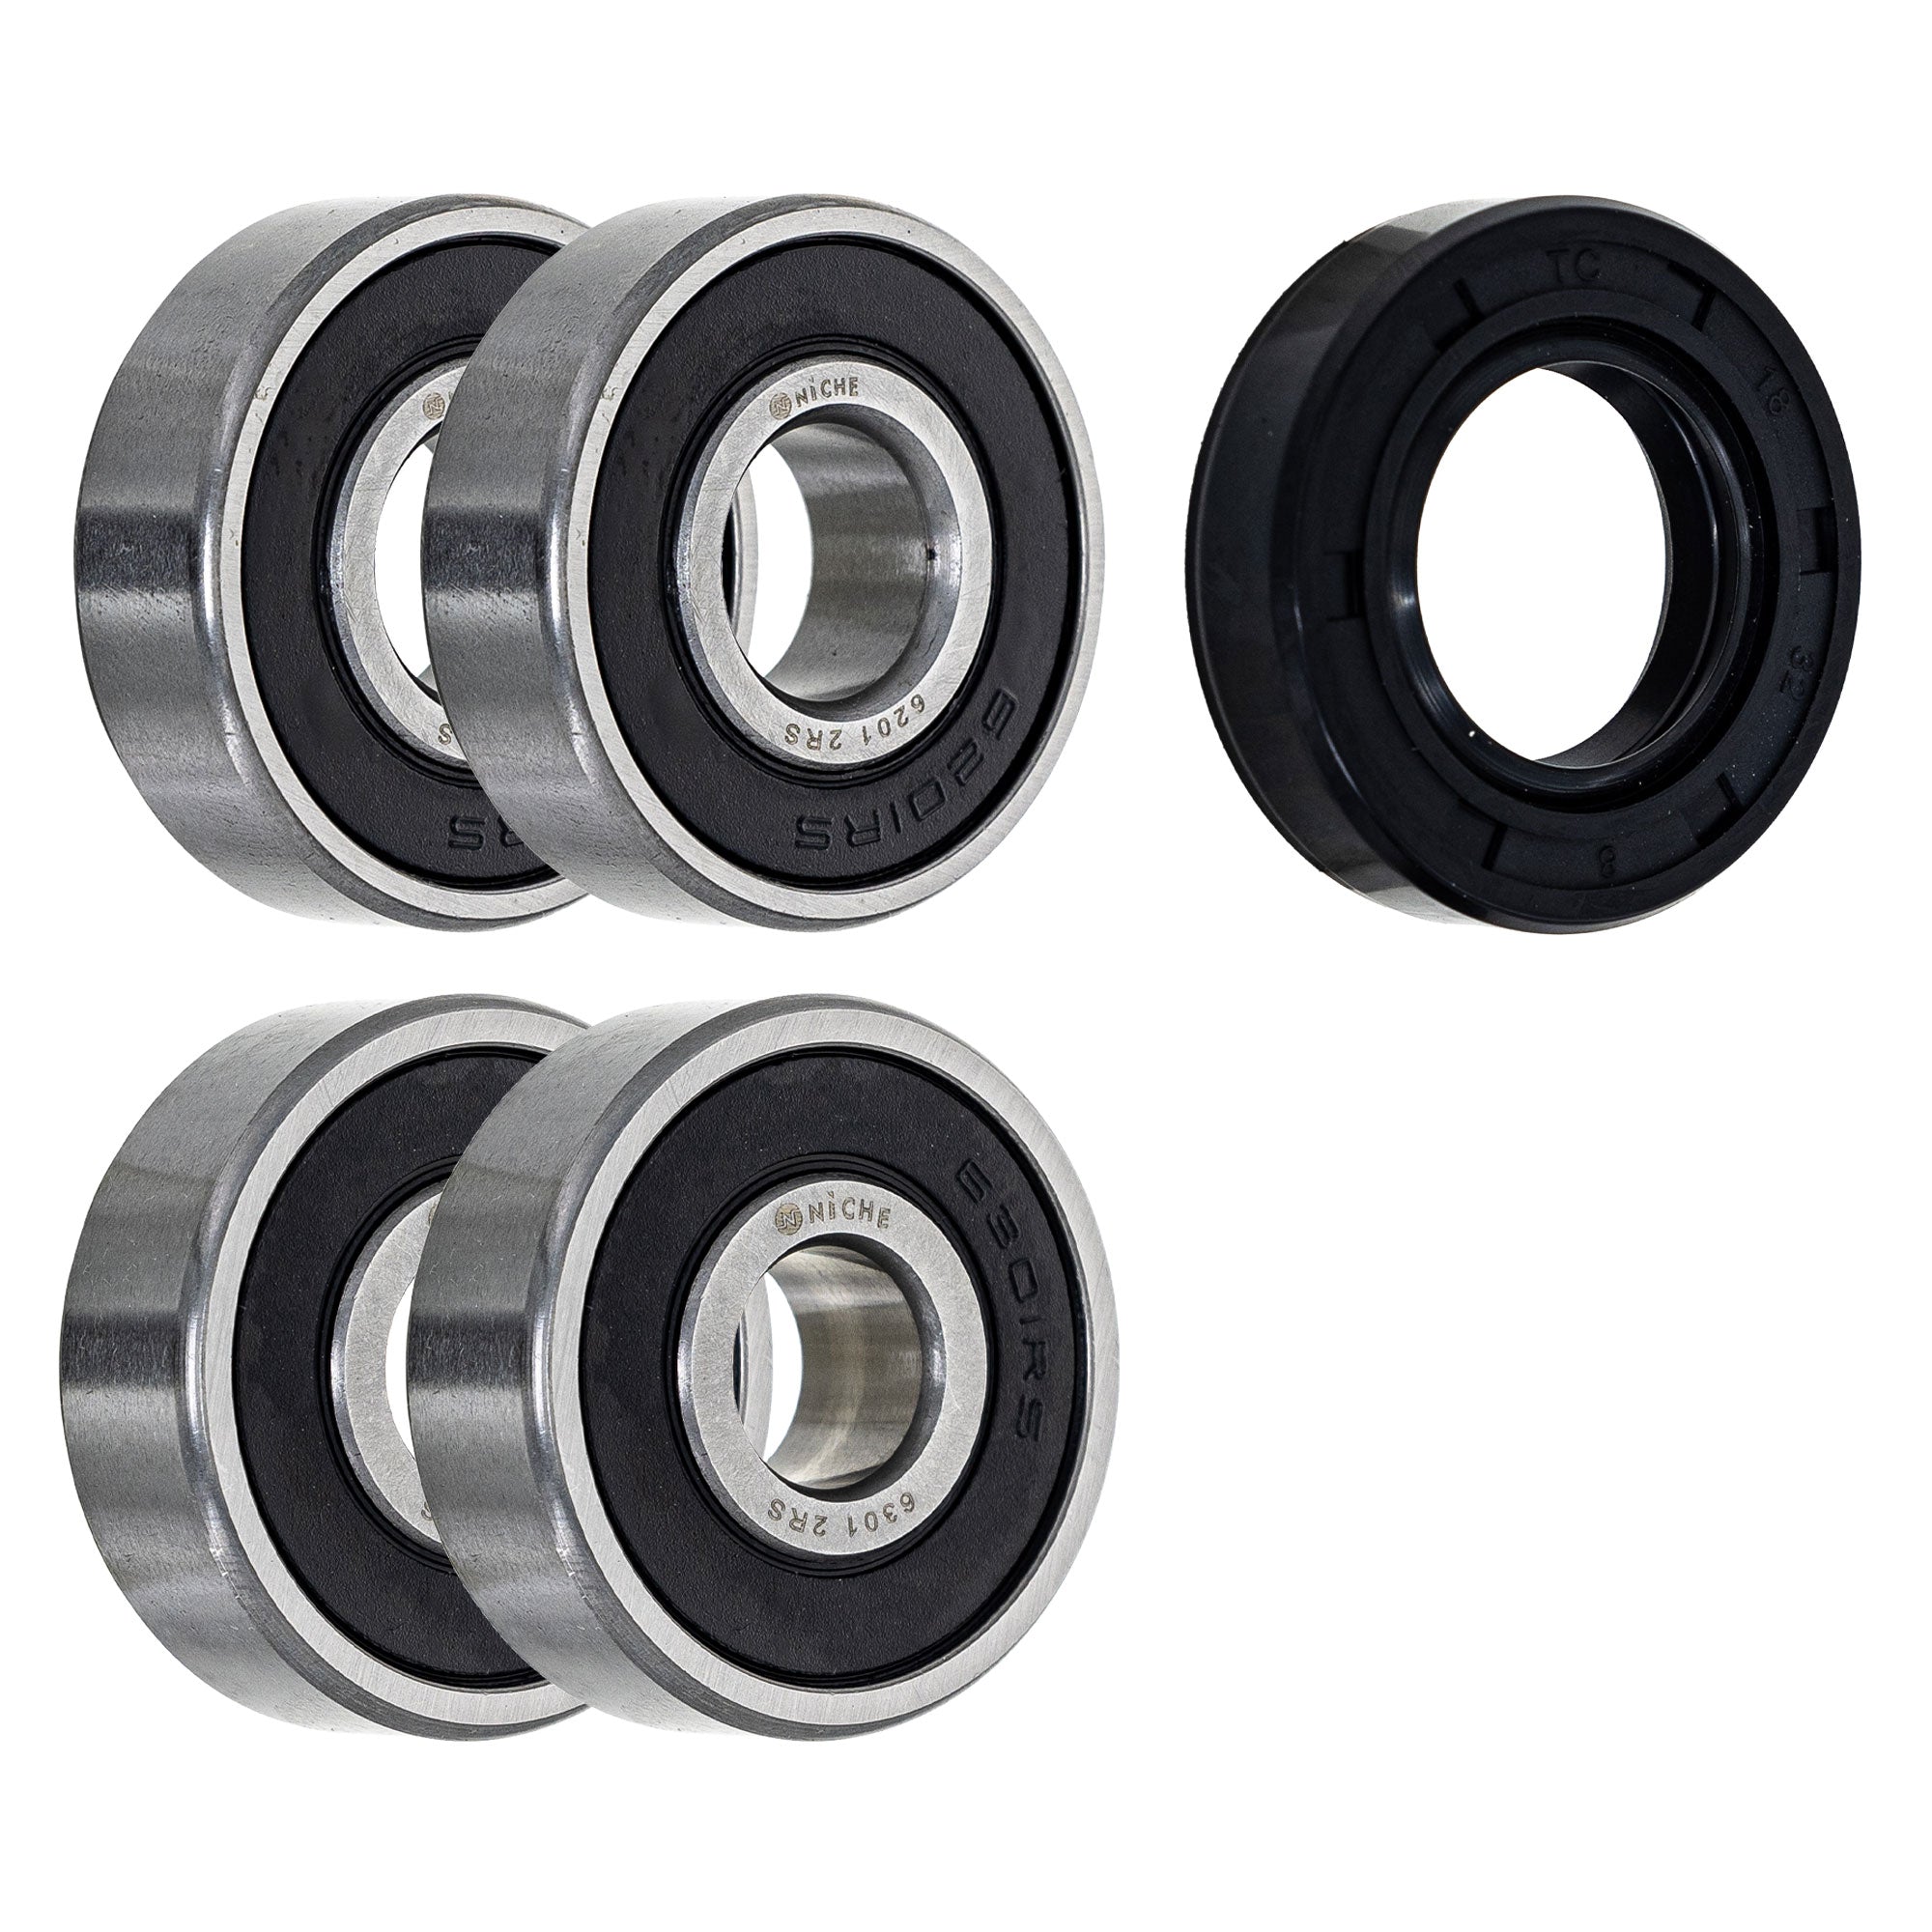 Wheel Bearing Seal Kit for zOTHER XR50R TS250 TS100 SP250 NICHE MK1008943